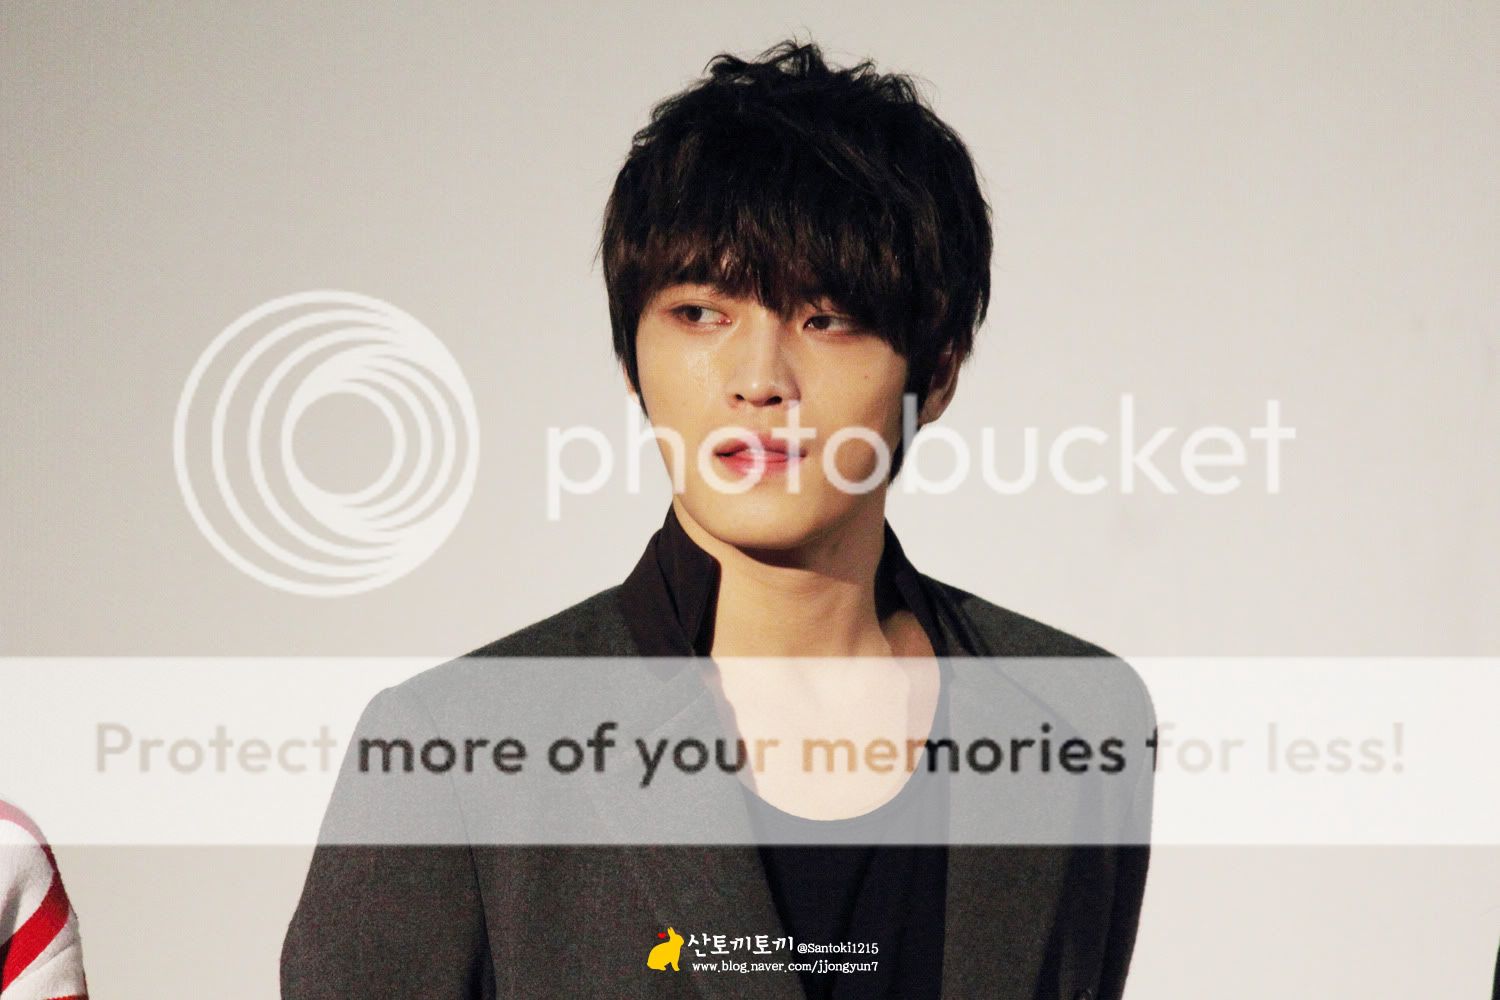 [25.11.12][Pics] Jaejoong - “Code Name Jackal” Stage Greeting (Day 6)   S112